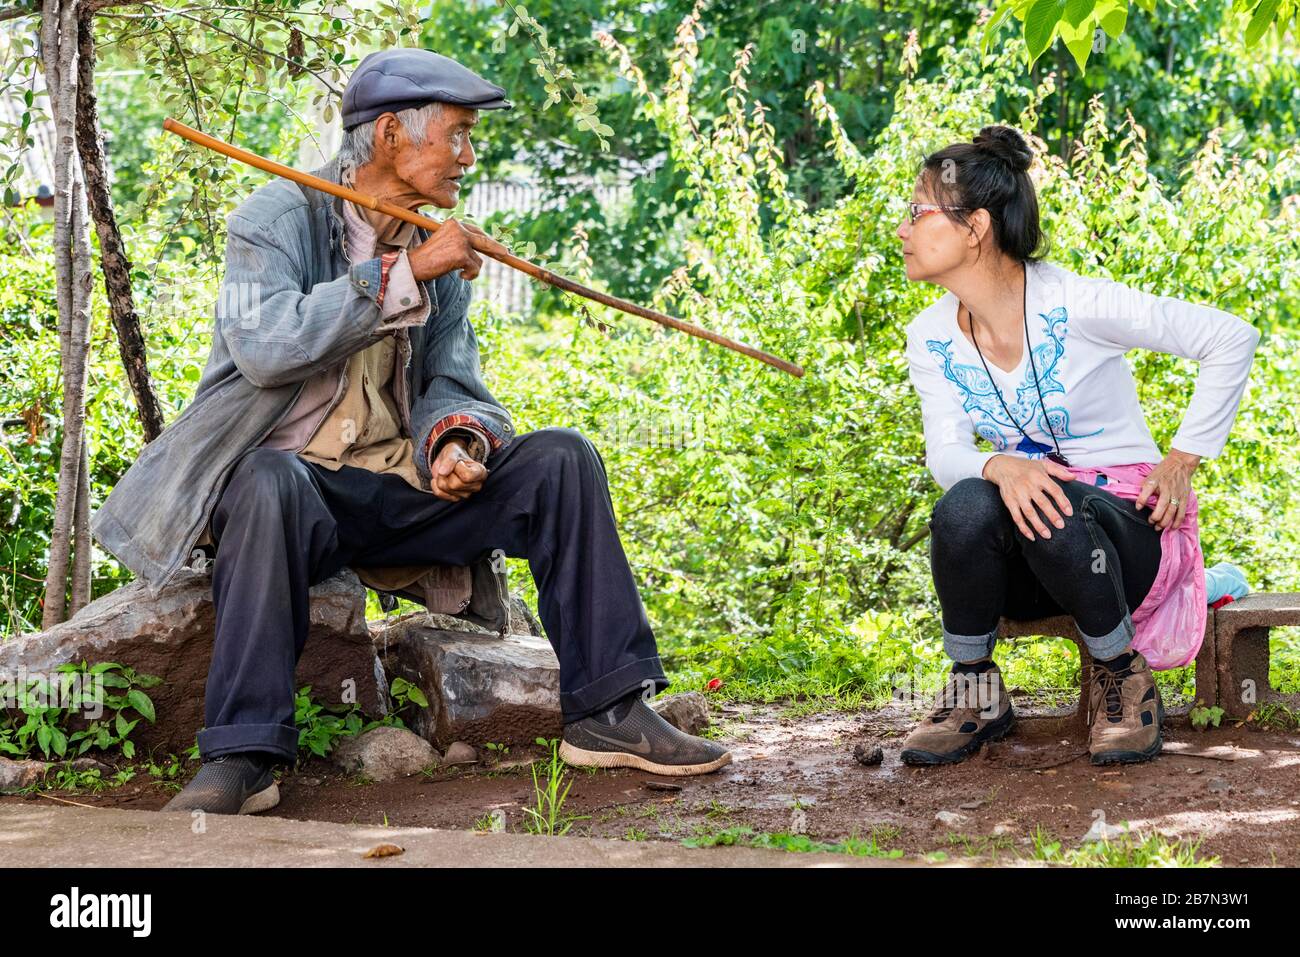 A tourist talking with one of the Naxi people in a section of the Ancient Tea Horse Road, chamagudao, near Lashi Lake in Yunnan China. Stock Photo